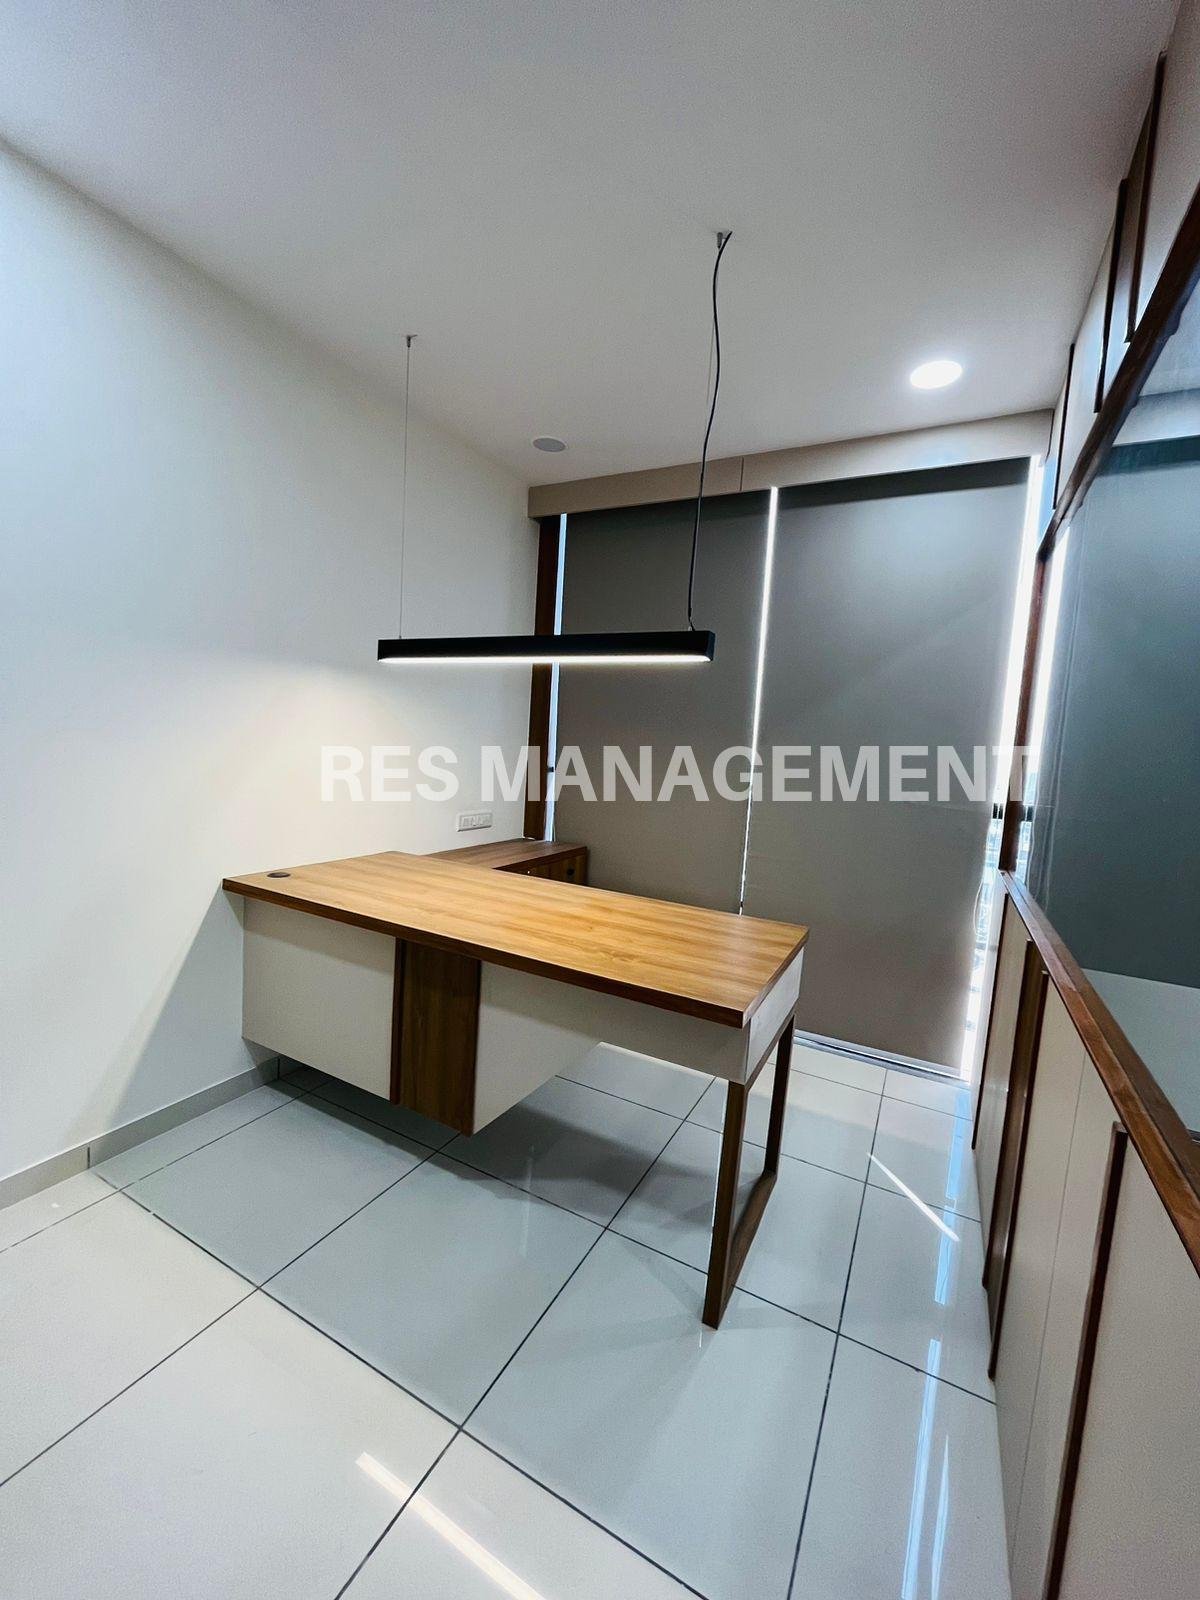 1 cabin conference 6 seating office For Rent WTT SG Highway